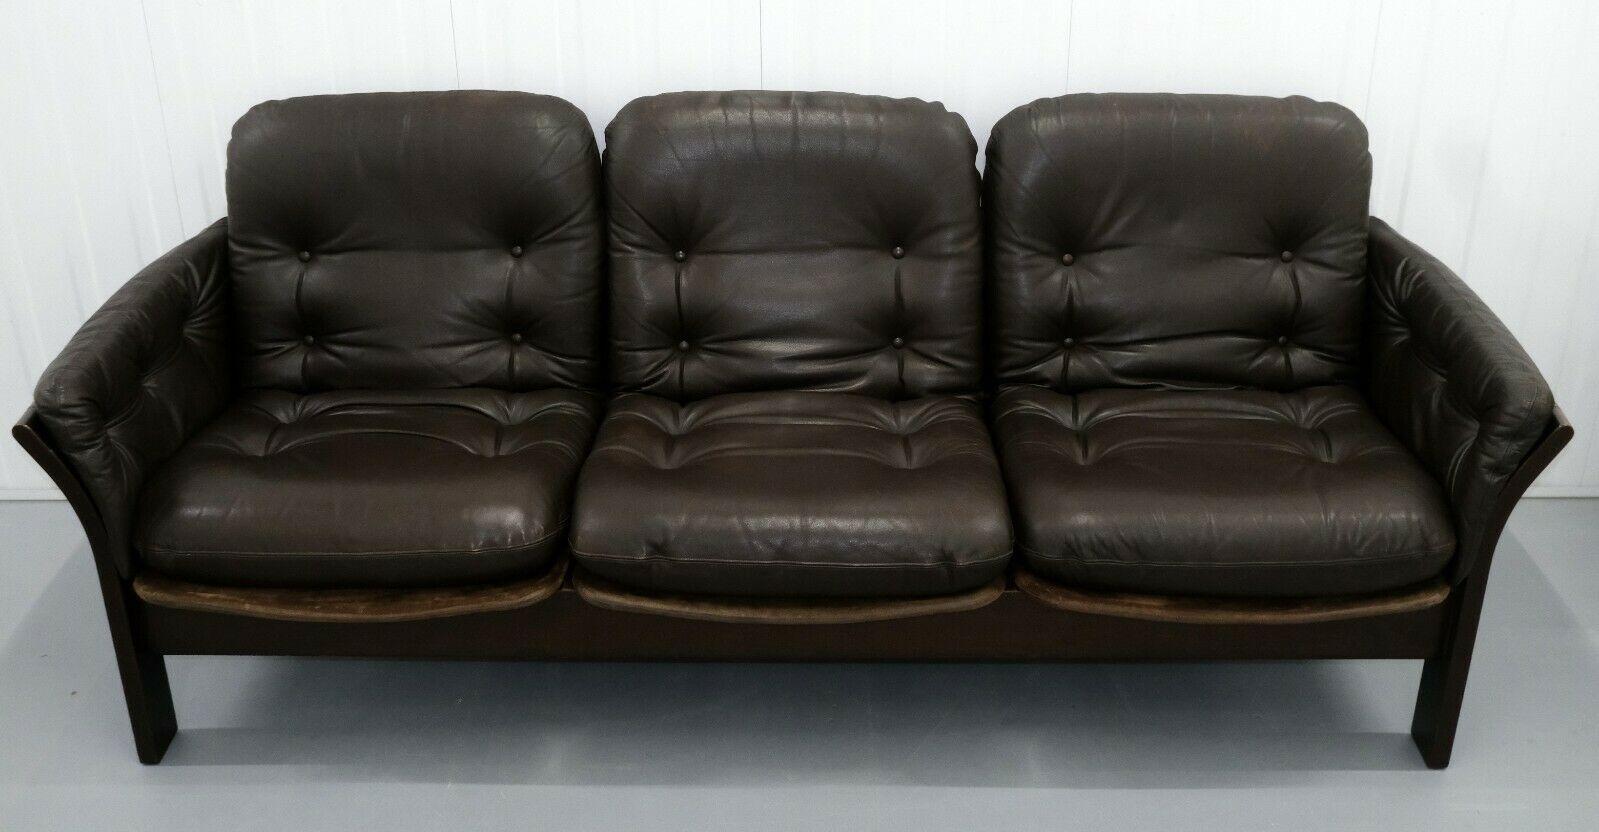 We are delighted to offer for sale this comfortable 1970's dark brown leather three seater sofa by Thams Kvalitet.

This is a beautiful and stylish sofa, made with soft brown leather and suede on the sides and back of the frame, it is perfect for